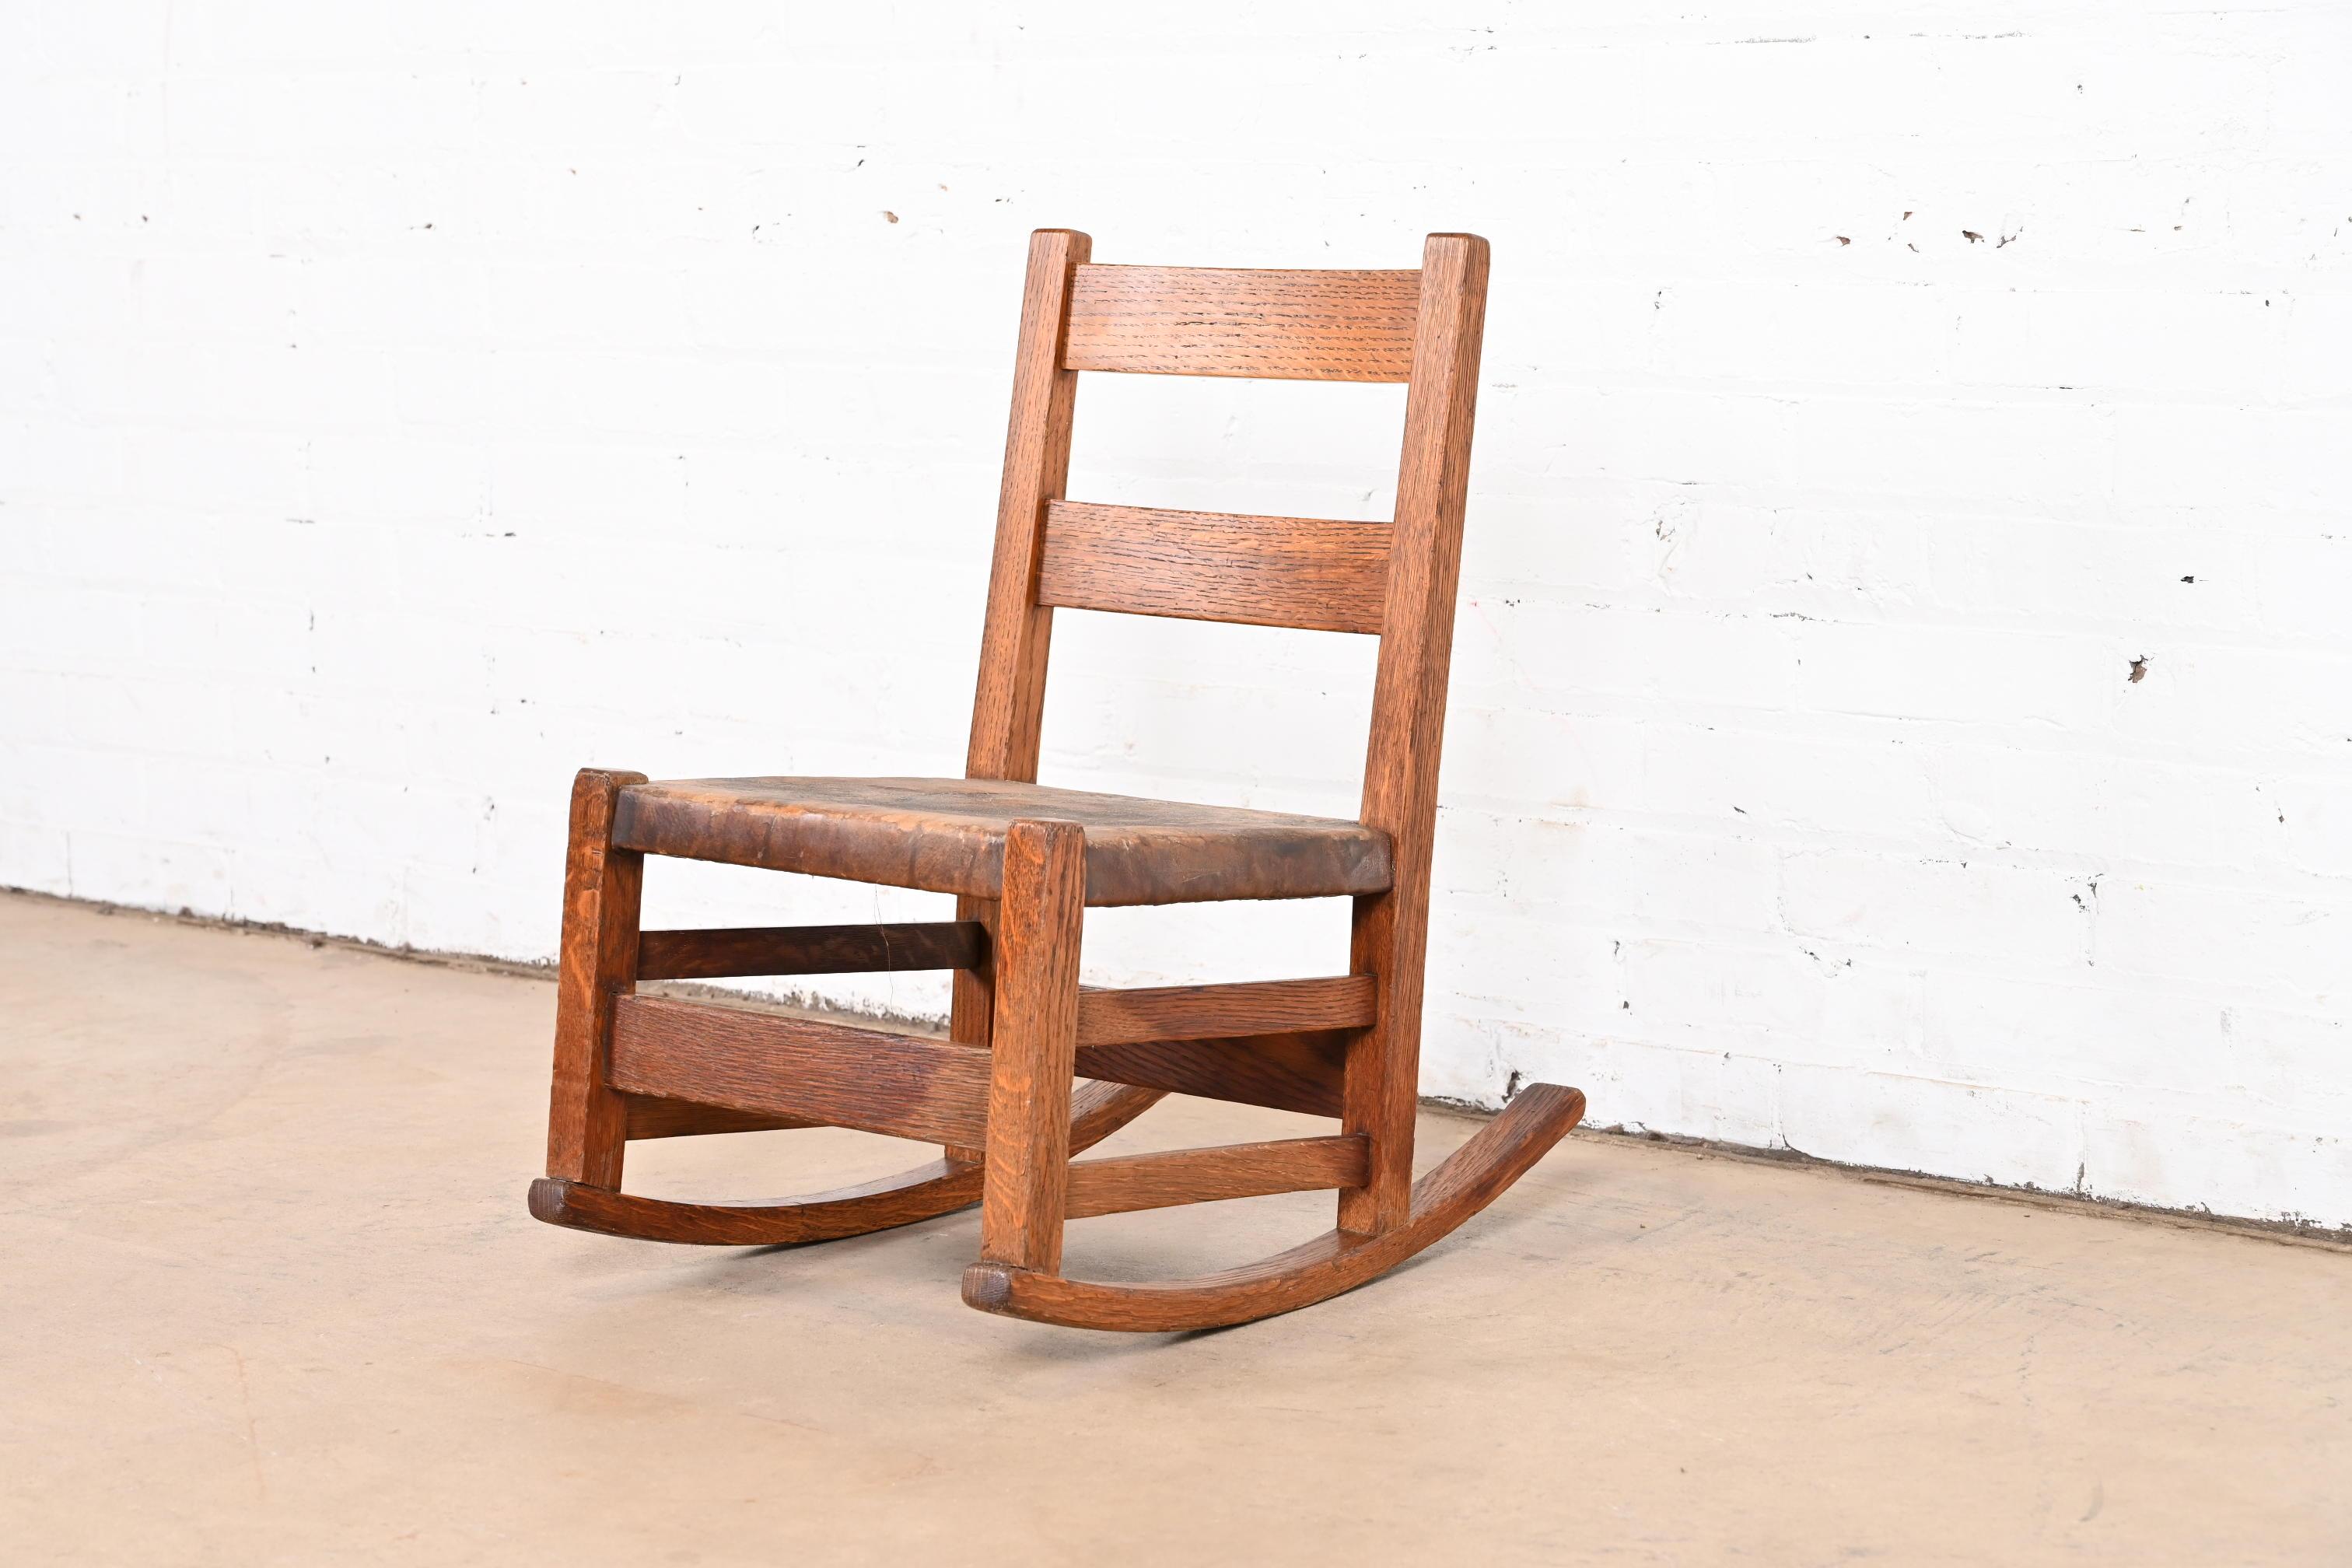 A gorgeous Mission oak Arts & Crafts child's rocking chair

By Gustav Stickley (partial label present on underside)

USA, Circa 1900

Solid quarter sawn oak, with original brown leather seat.

Measures: 14